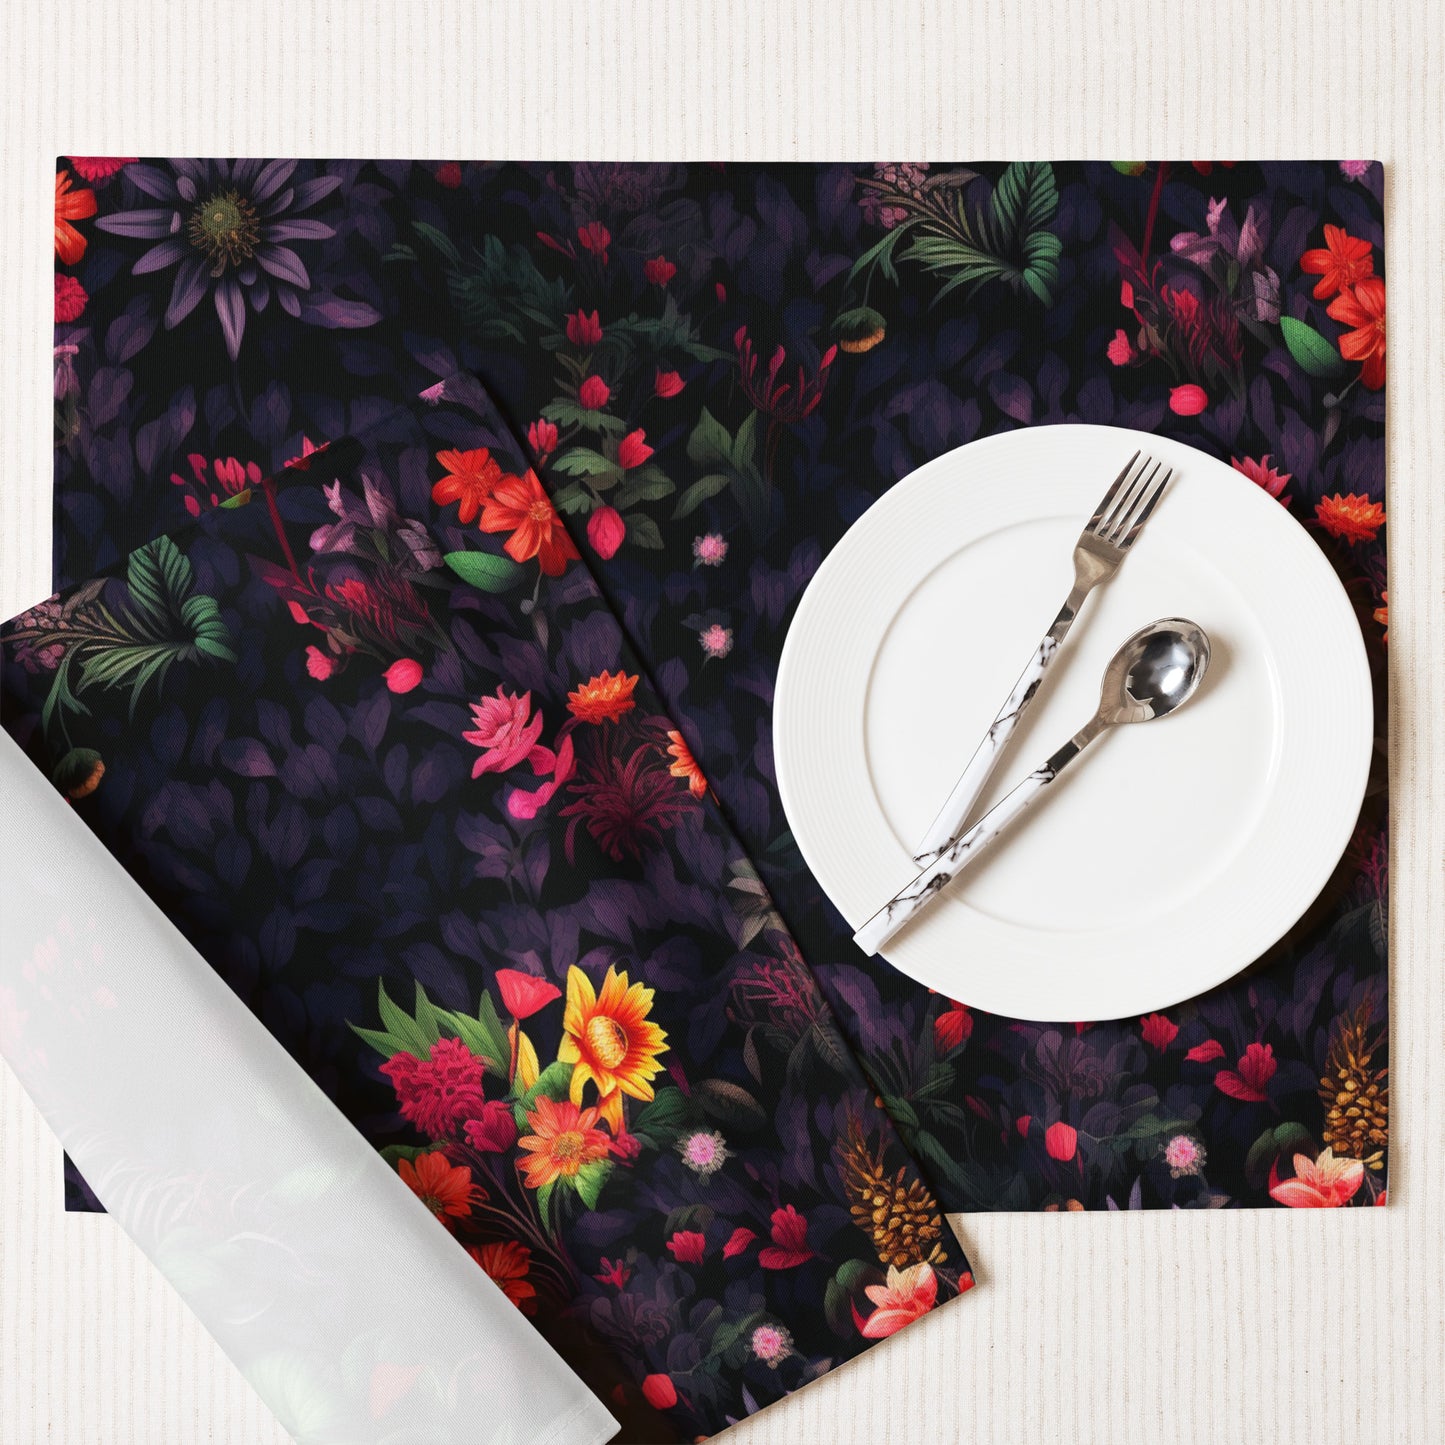 Neduz Designs Artified Floral Print Placemat Set - Elegant, Water-Resistant Dining Accessory